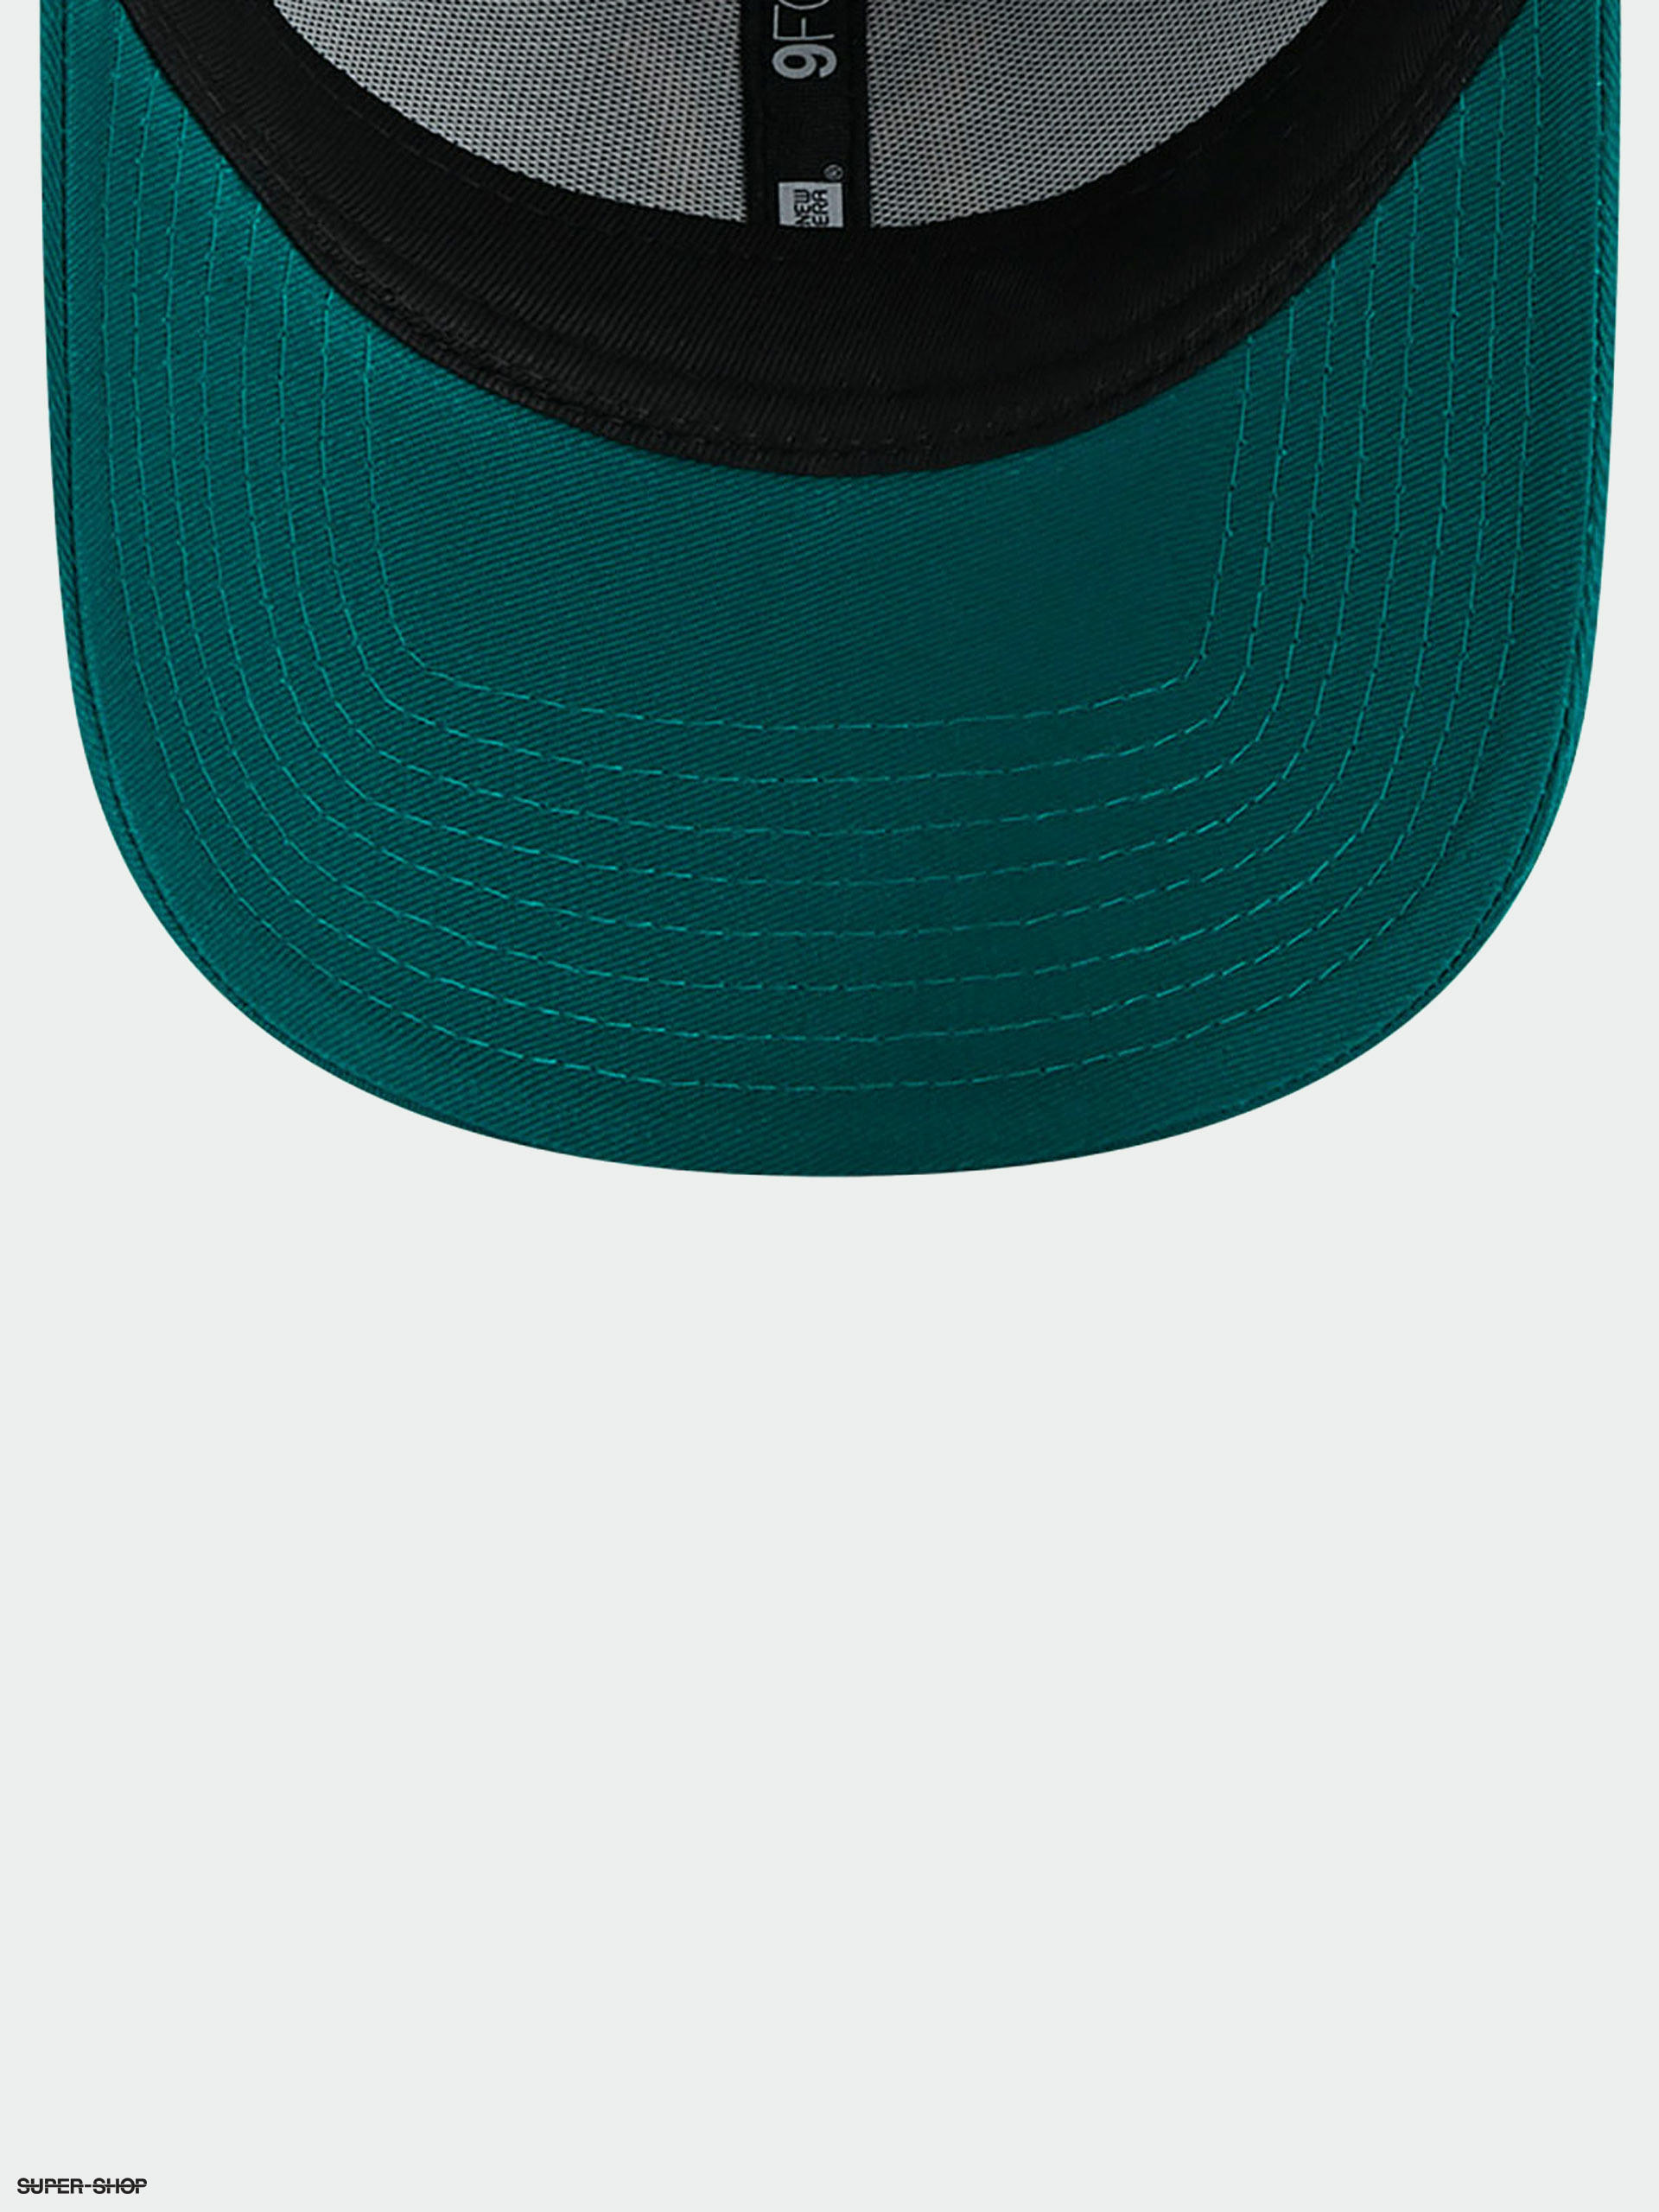 New Era League Essential 9Forty New York Yankees Cap (green/yellow)